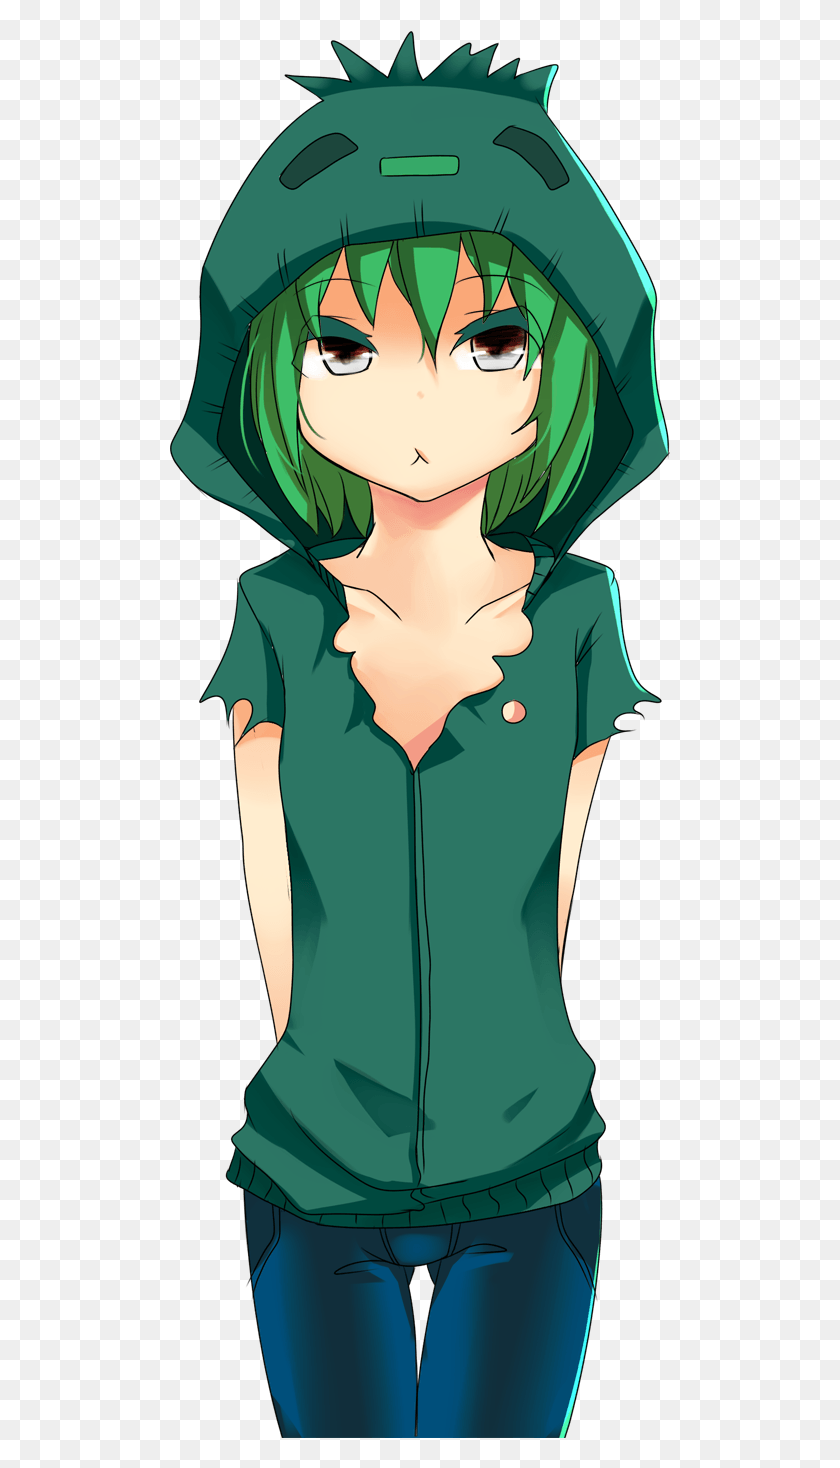 501x1408 Descargar Png Zombie Girl Minecraft Anime Zombie Girl, Ropa, Ropa, Manga Hd Png